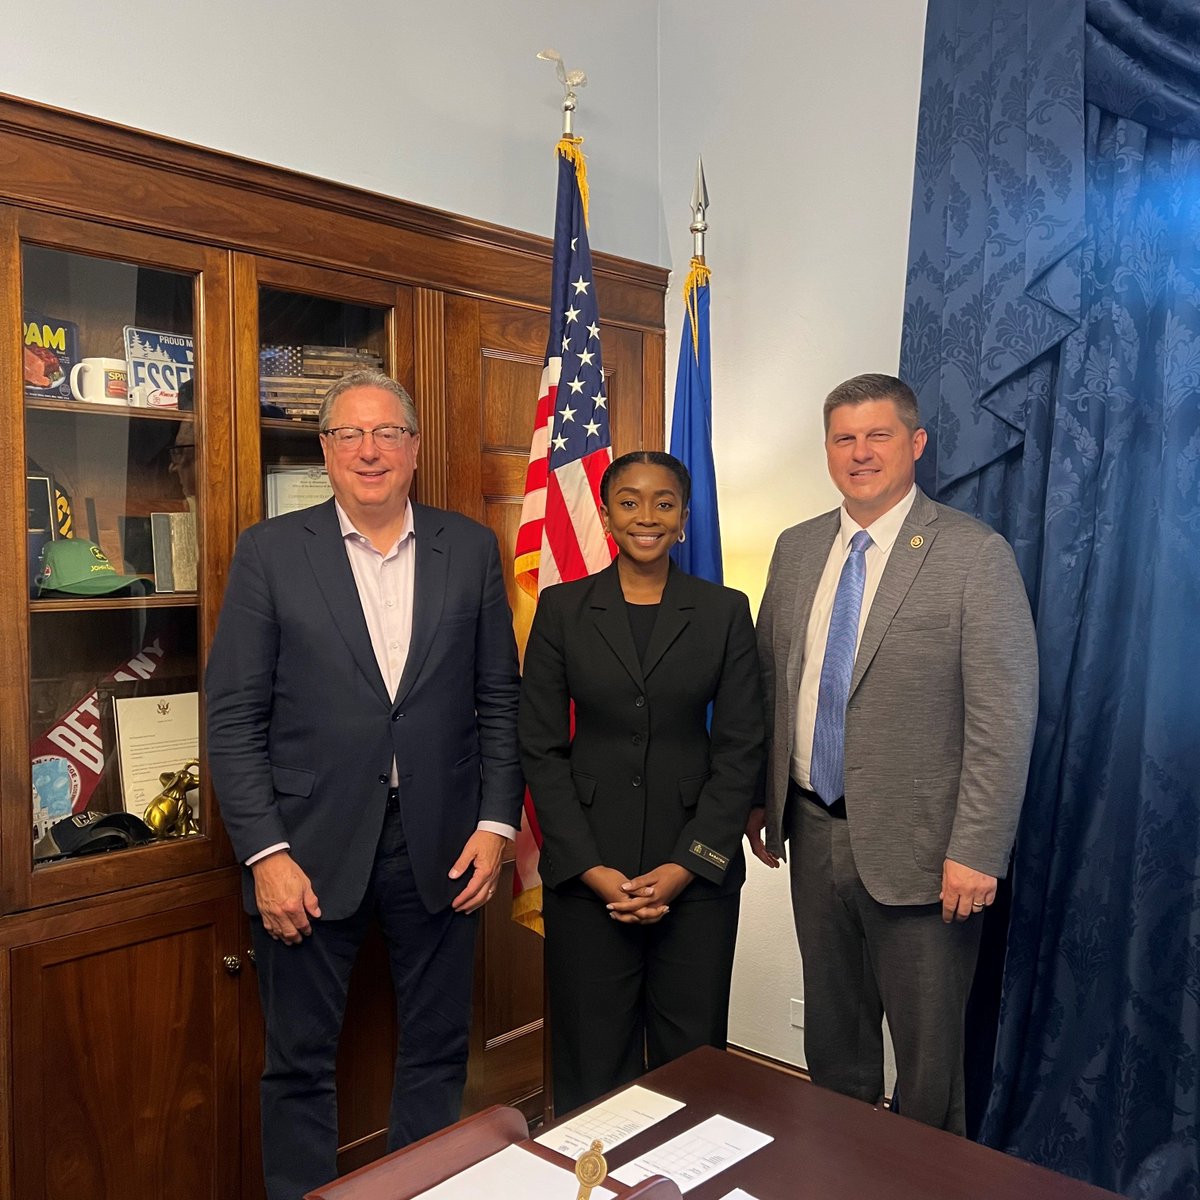 Great to meet with Lester Bagley and Ronika Carter to discuss all things @Vikings and ways we can ensure fan safety for the upcoming season. #Skol